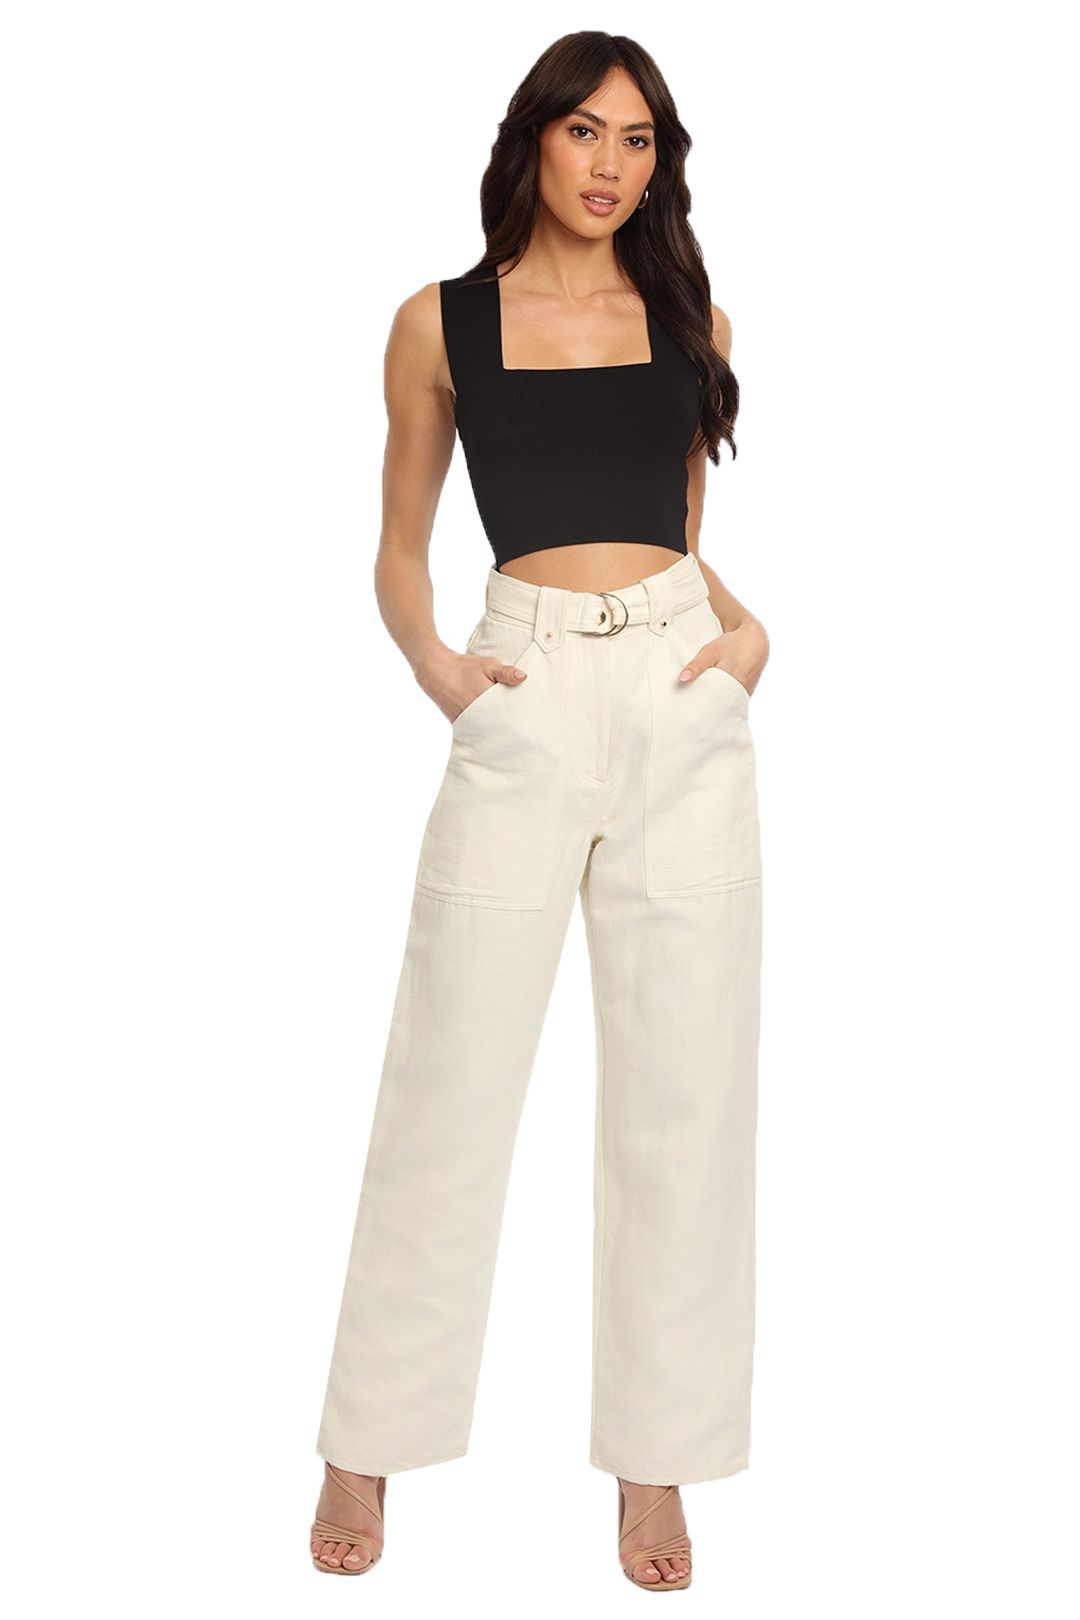 Acler Bancroft Pant white front 